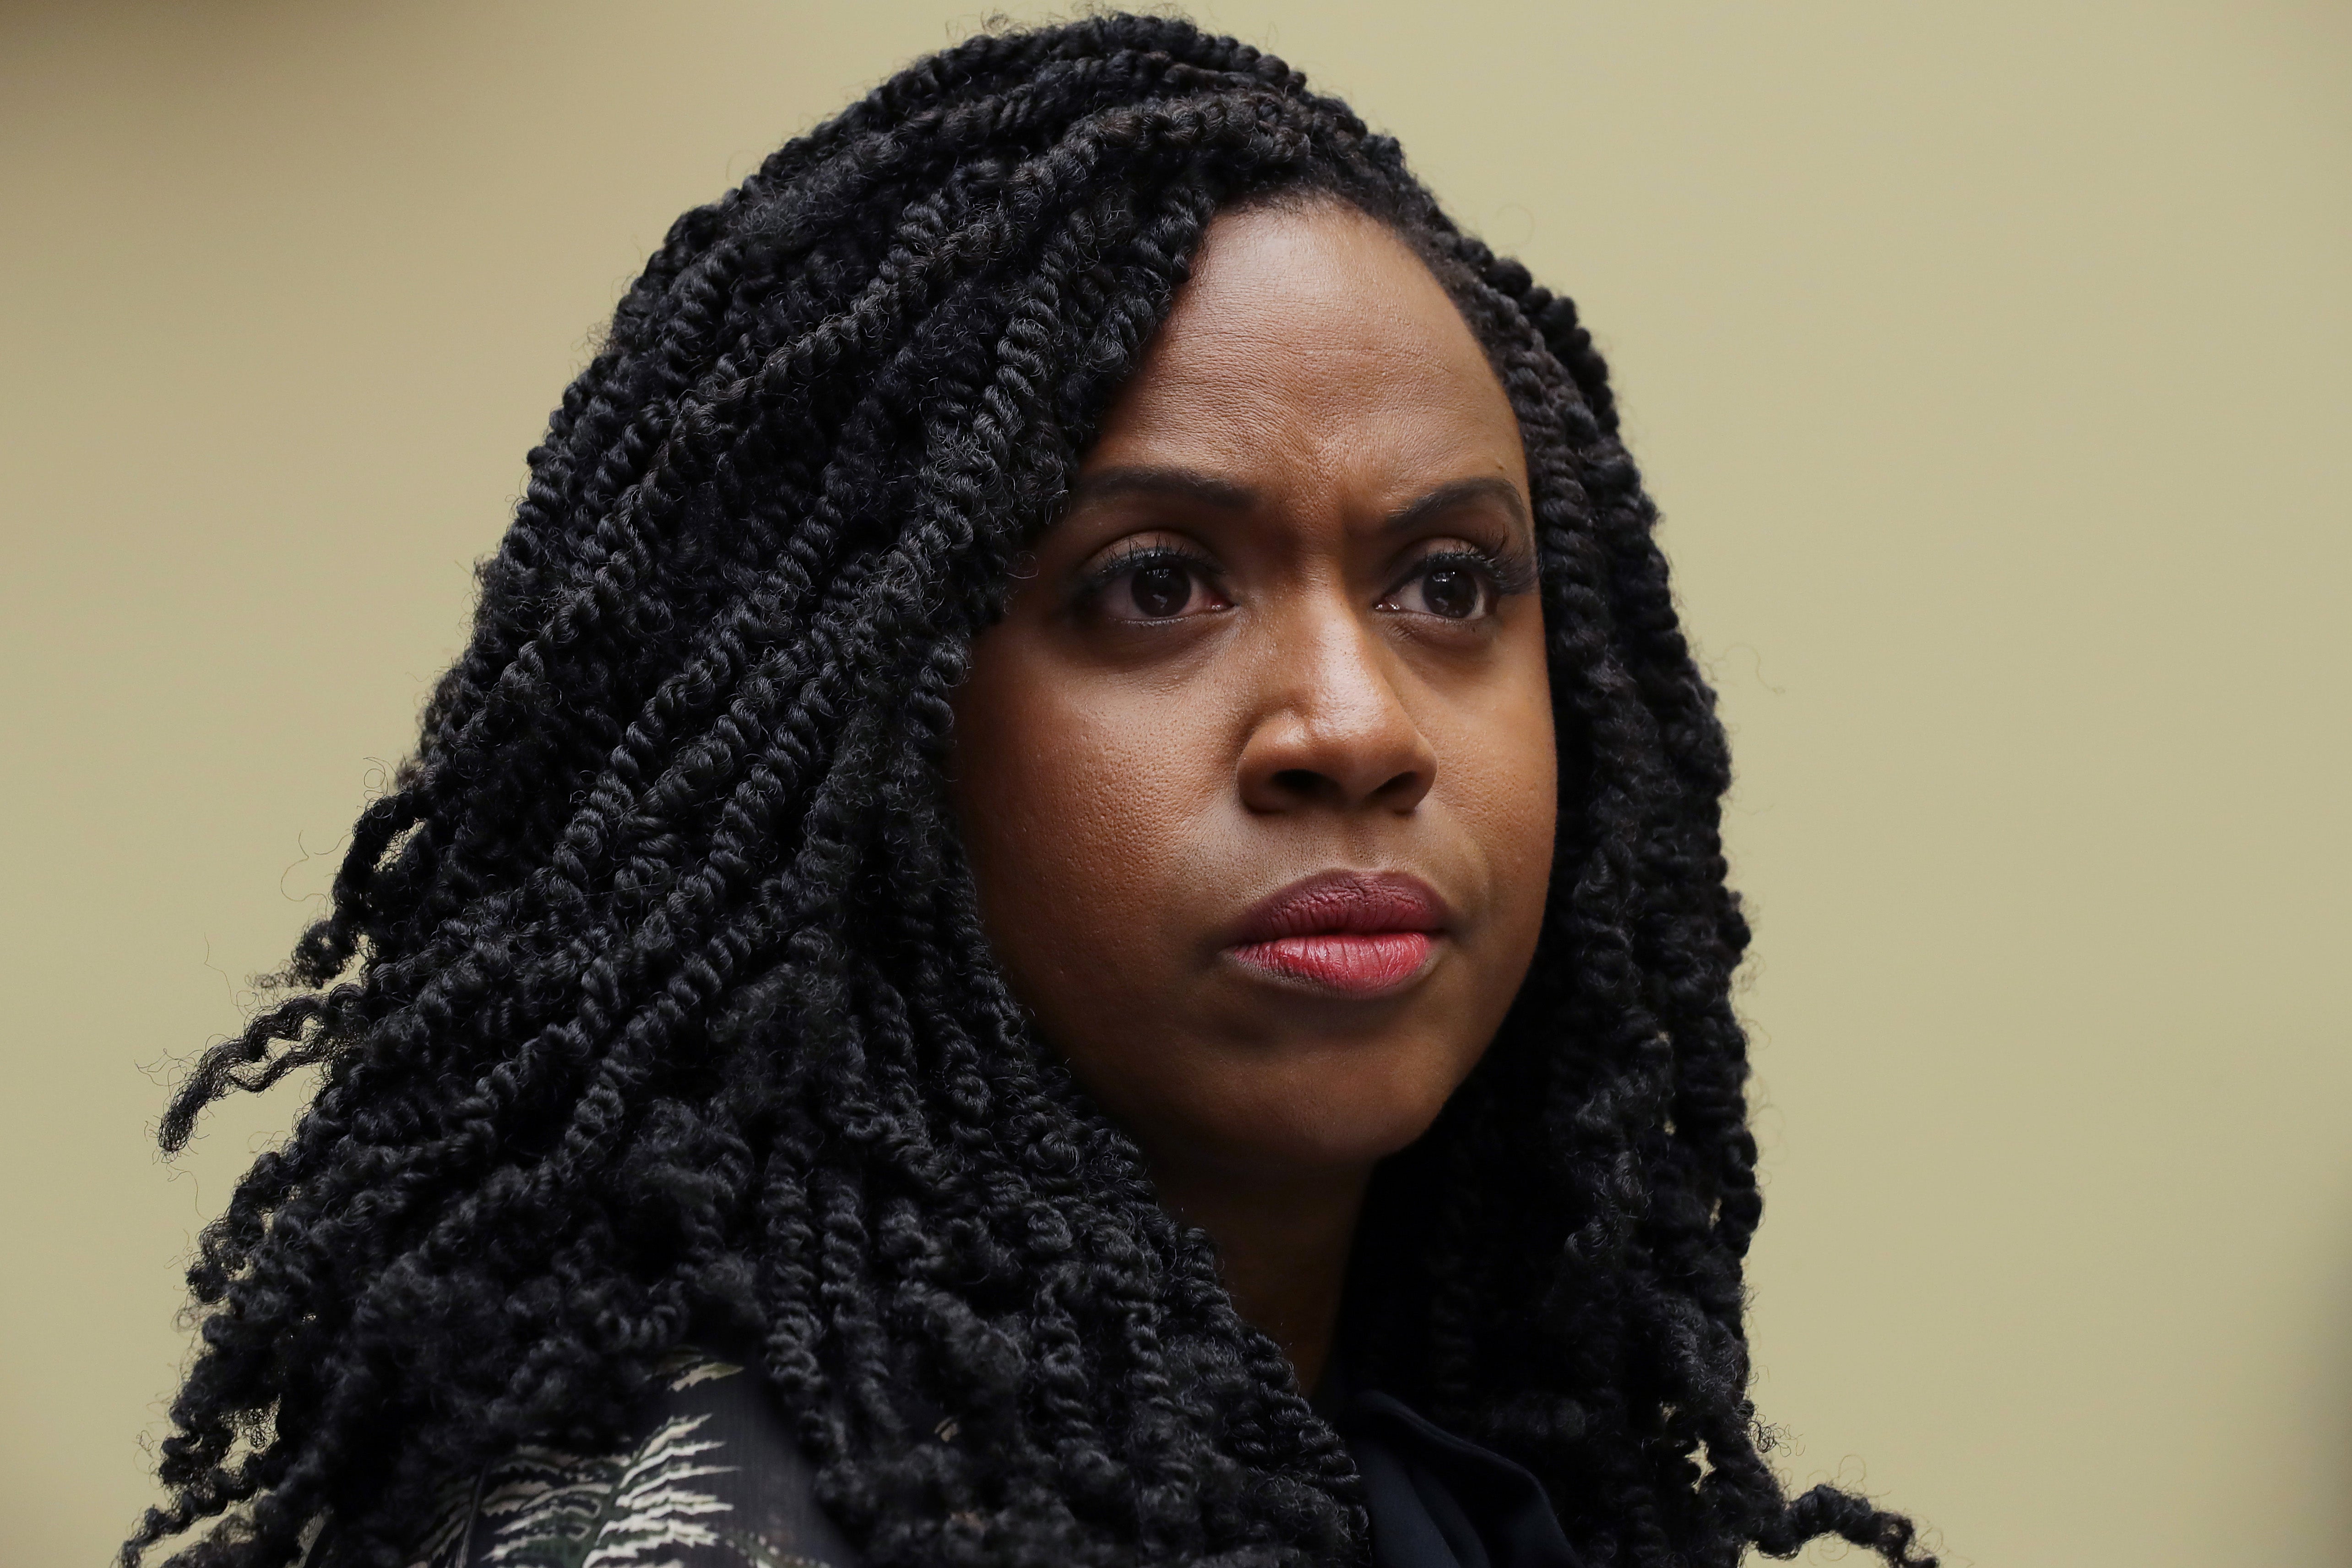 Rep. Ayanna Pressley Talks Gun Control, Immigration On 'The Daily Show'